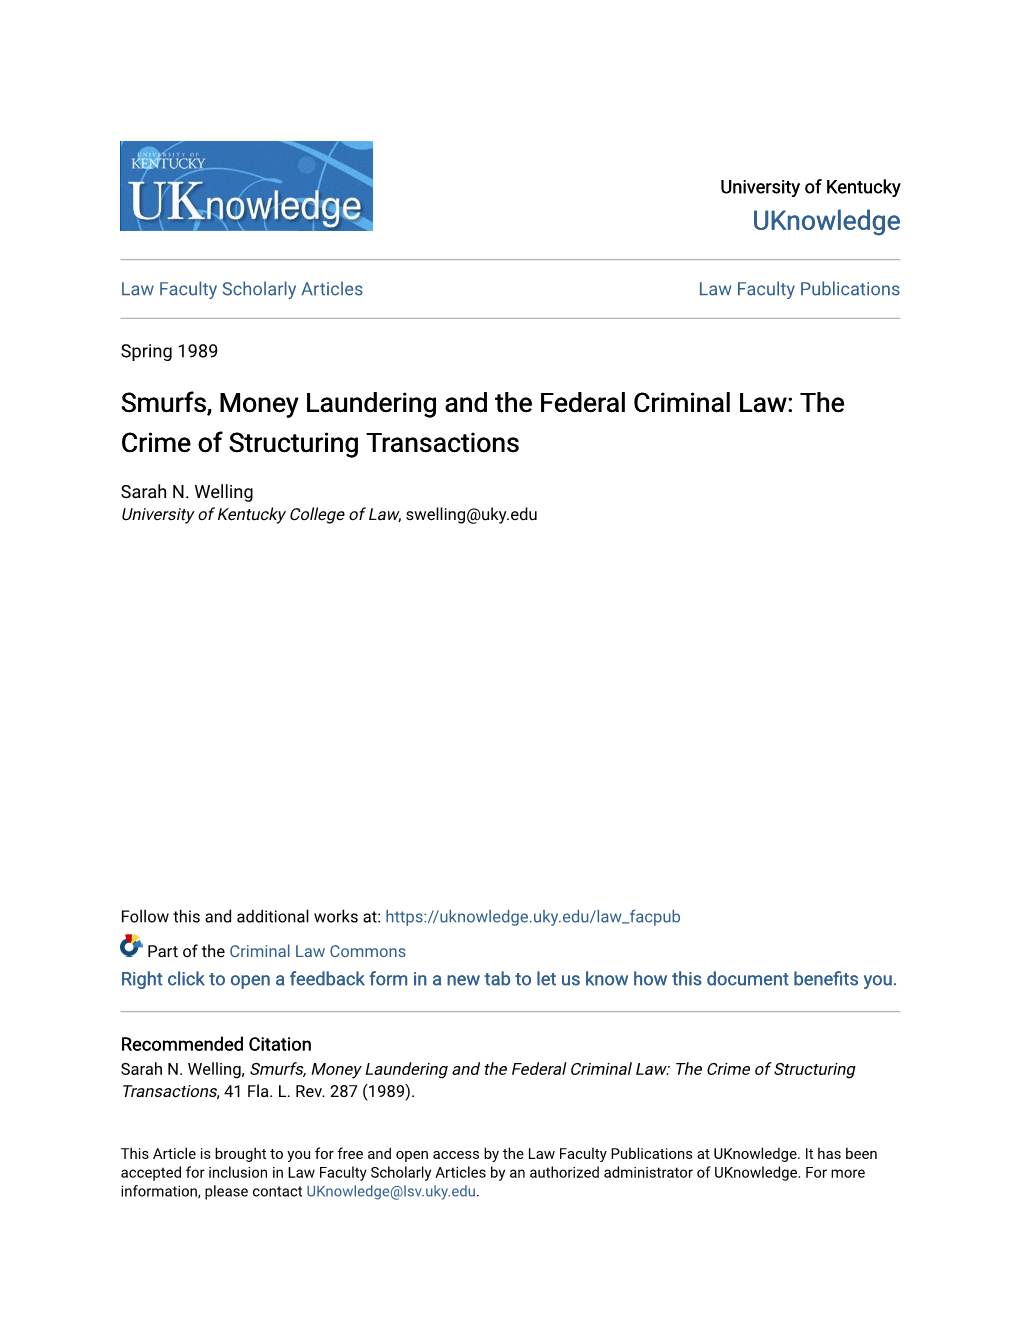 Smurfs, Money Laundering and the Federal Criminal Law: the Crime of Structuring Transactions